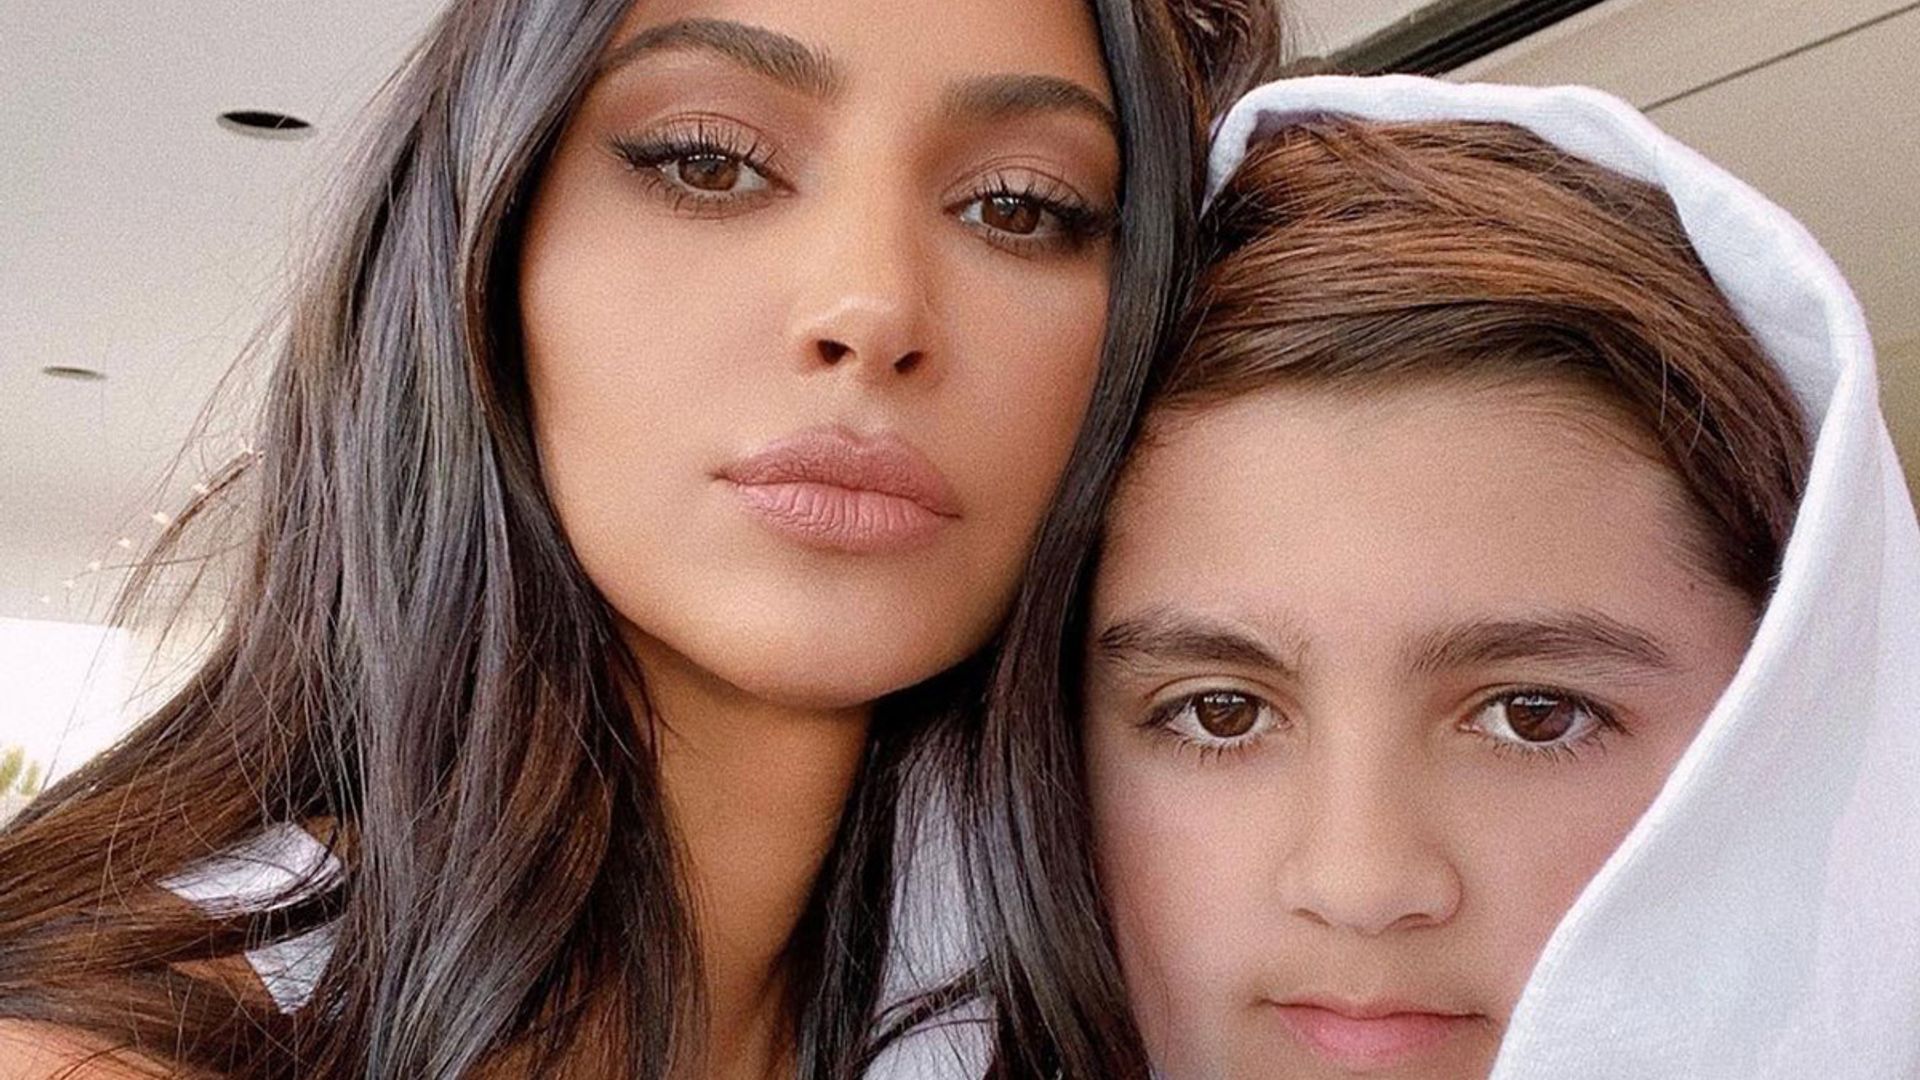 Fans in disbelief as Mason Disick towers over aunt Kim Kardashian in birthday photo